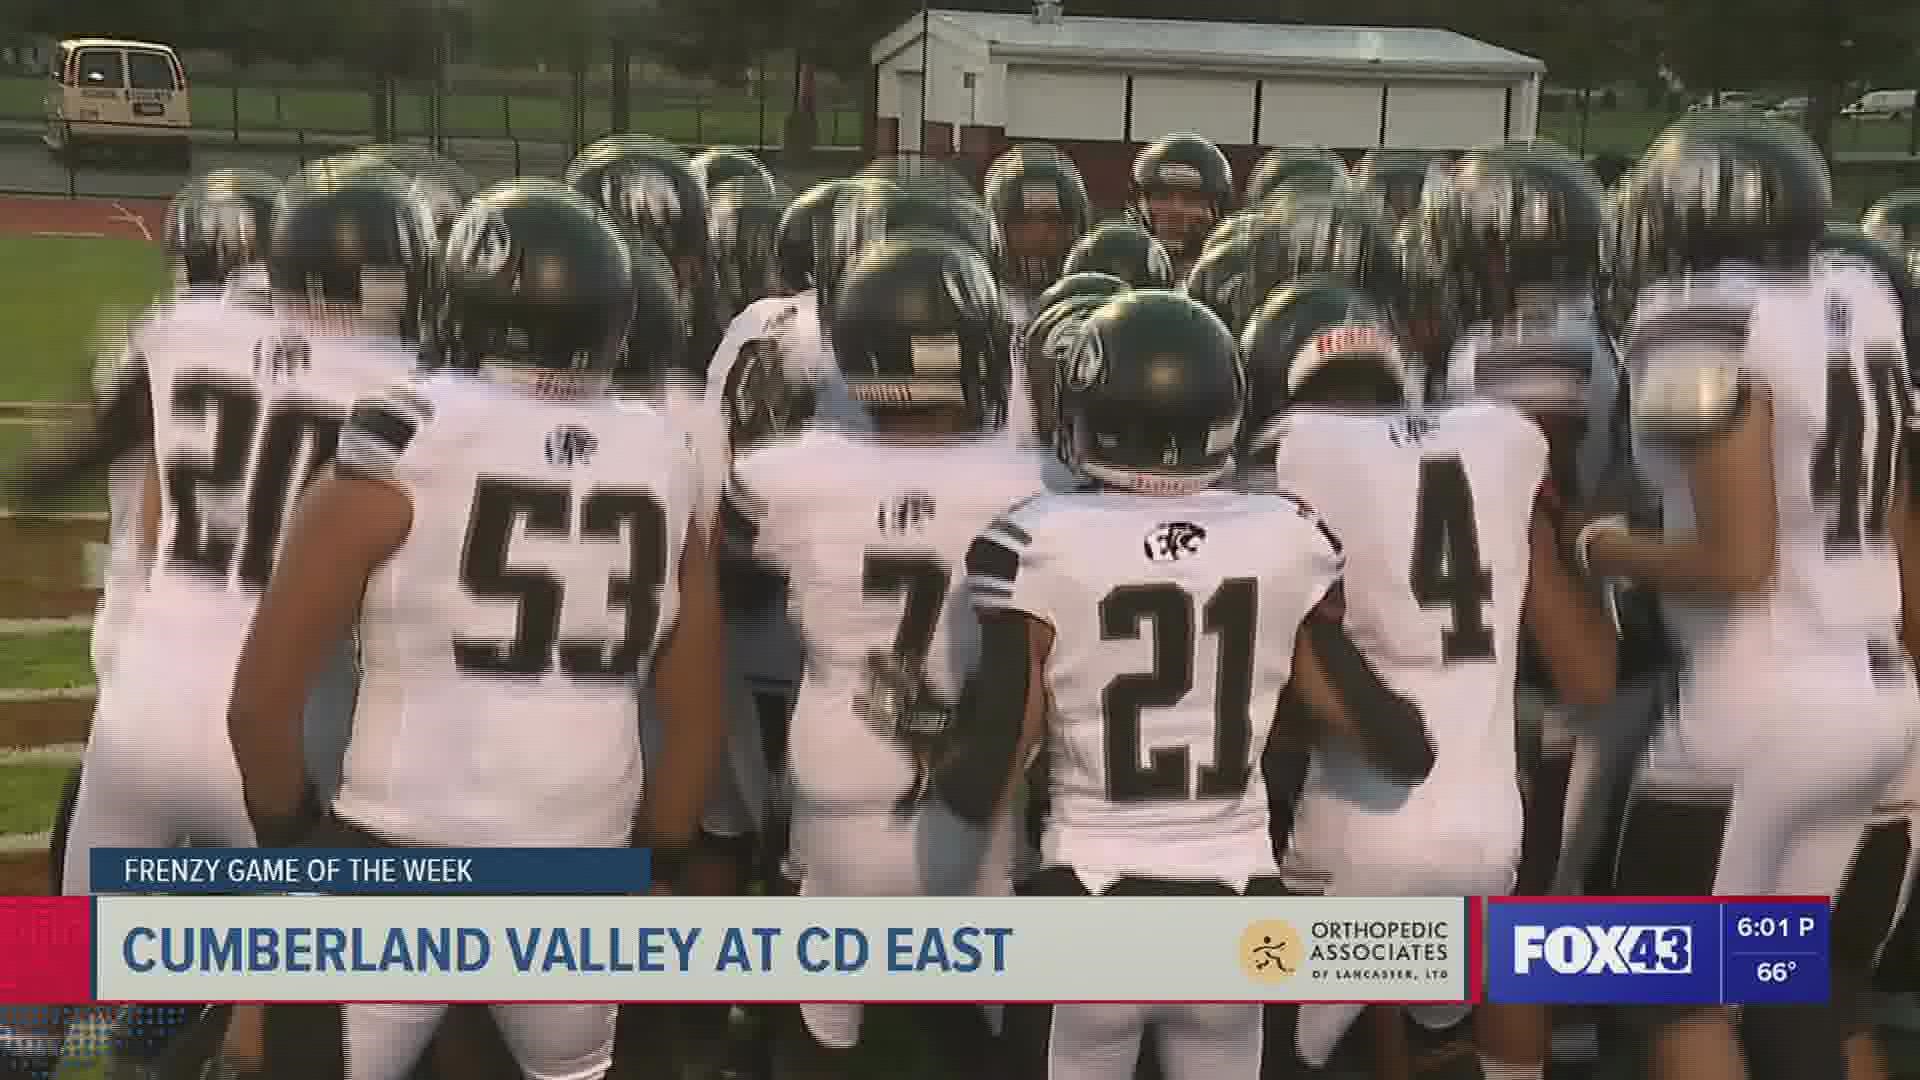 Week 6 Game of the week preview - Cumberland Valley at CD East.